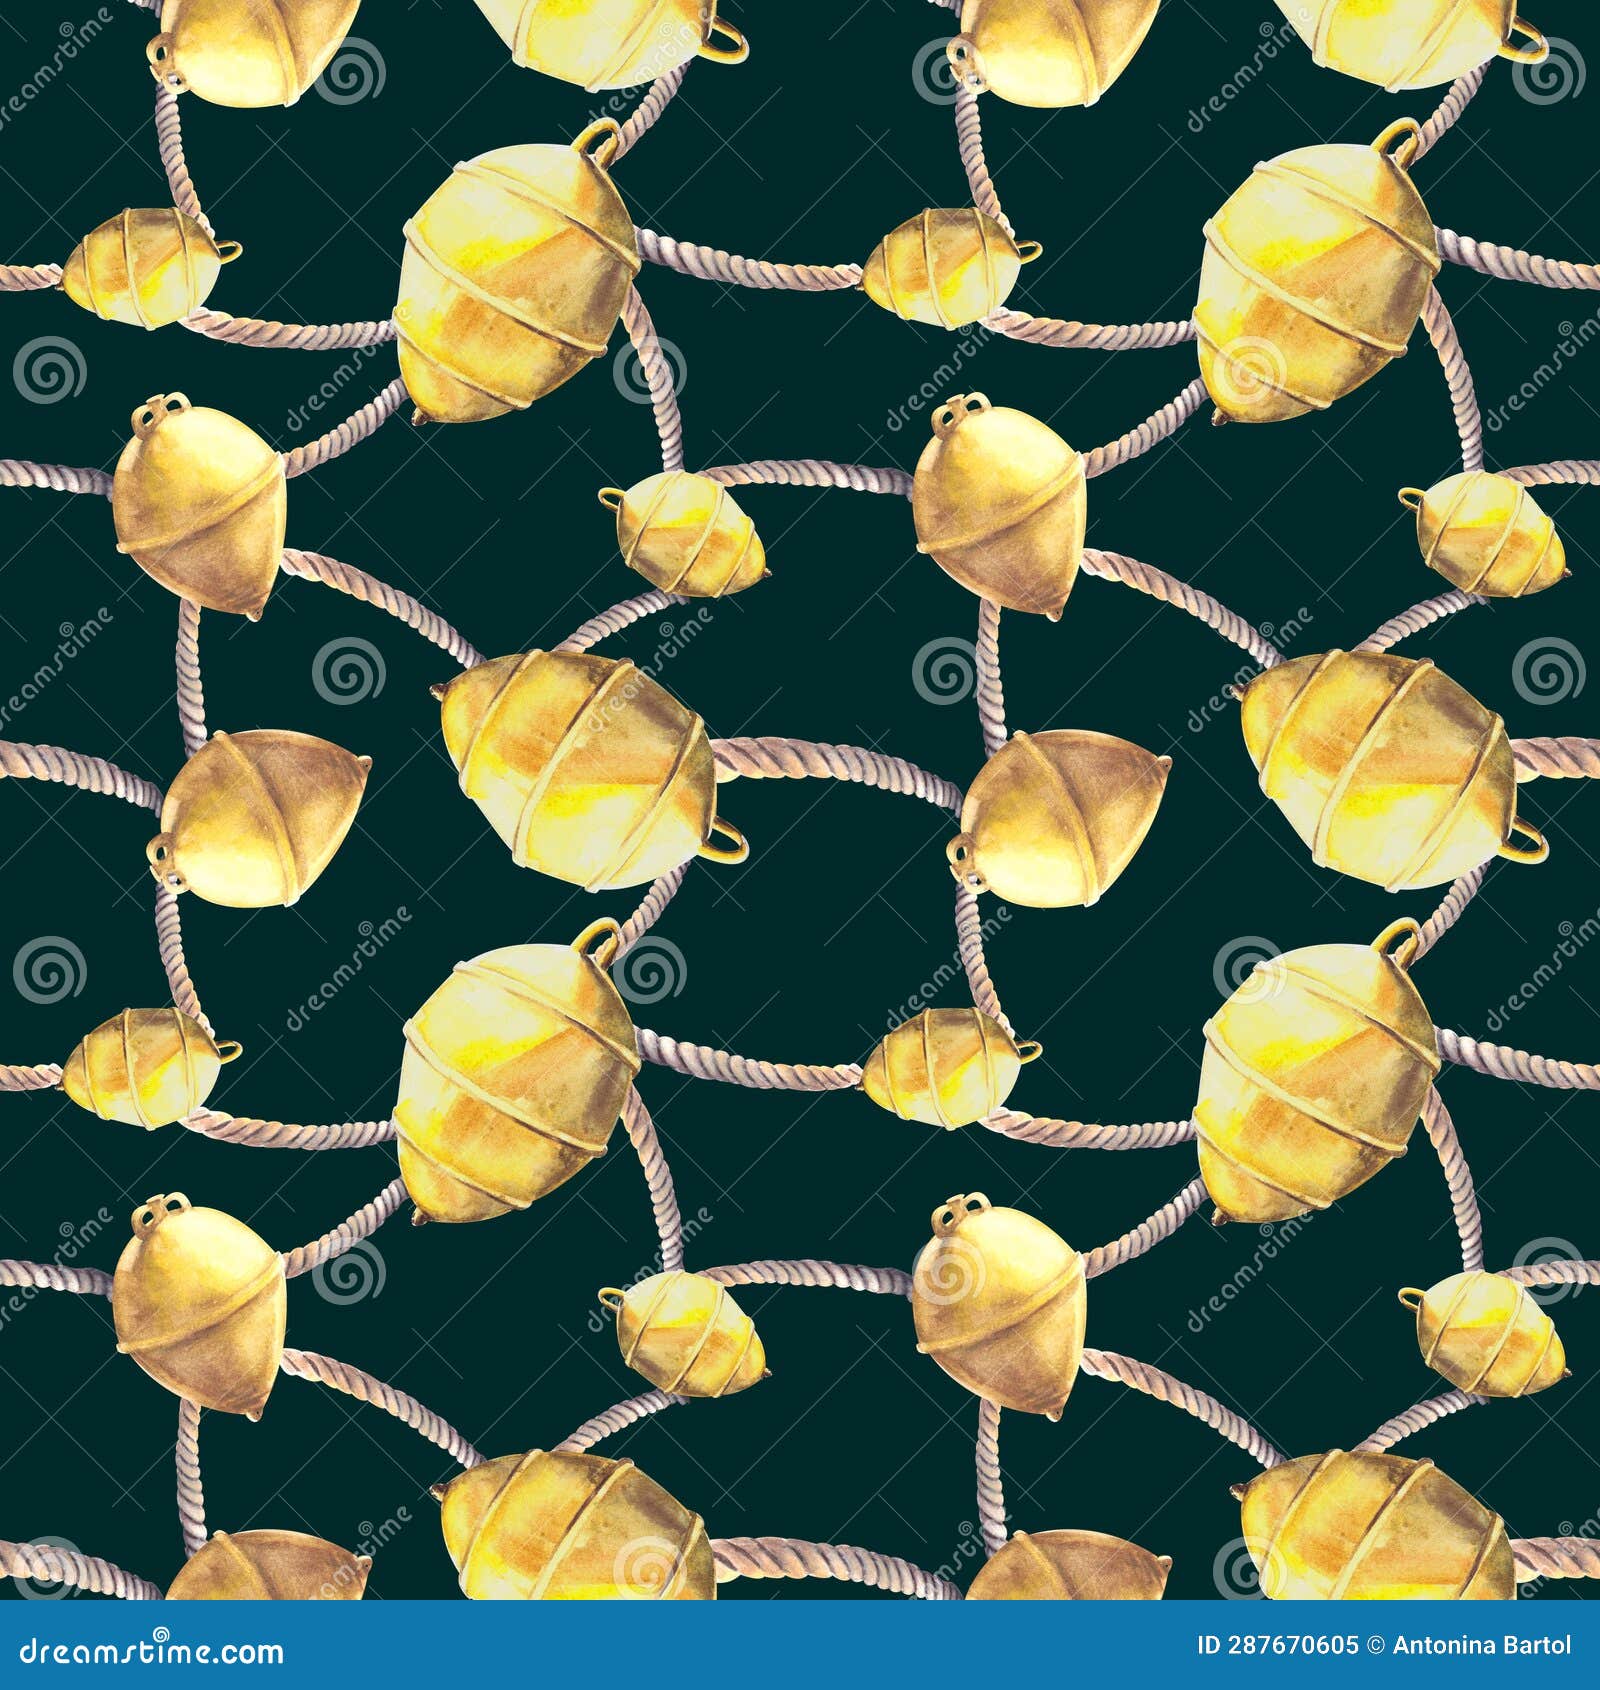 Nautical Seamless Pattern Sea Yellow Buoys with Ropes Isolated on